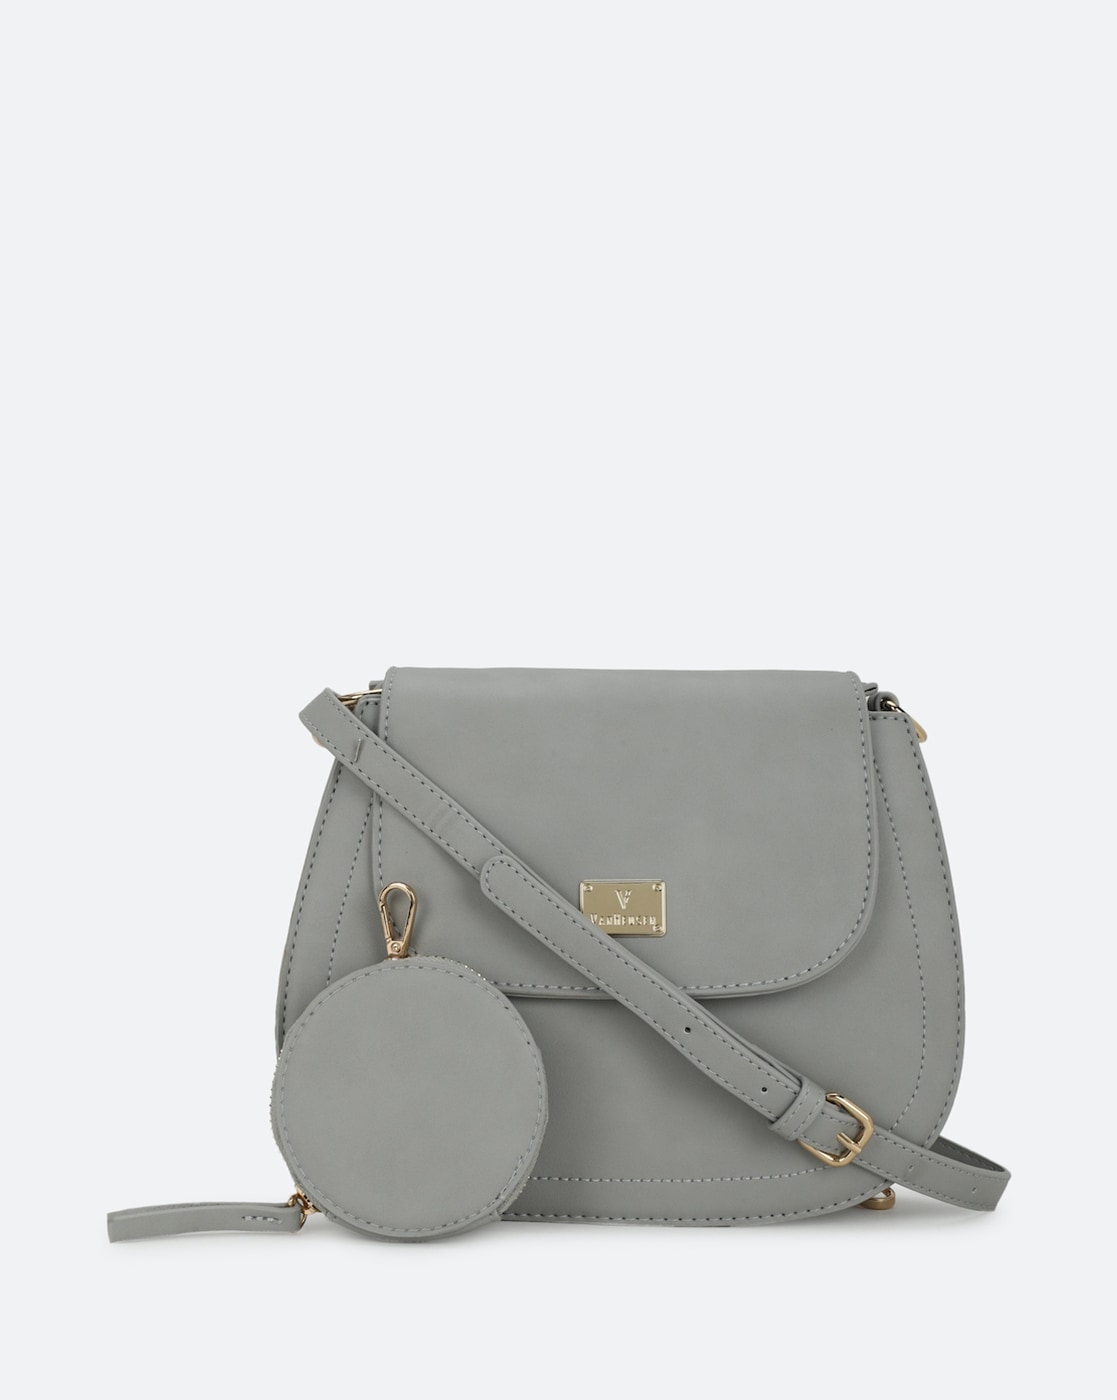 Ophidia GG crossbody bag in grey and black Supreme | GUCCI® US